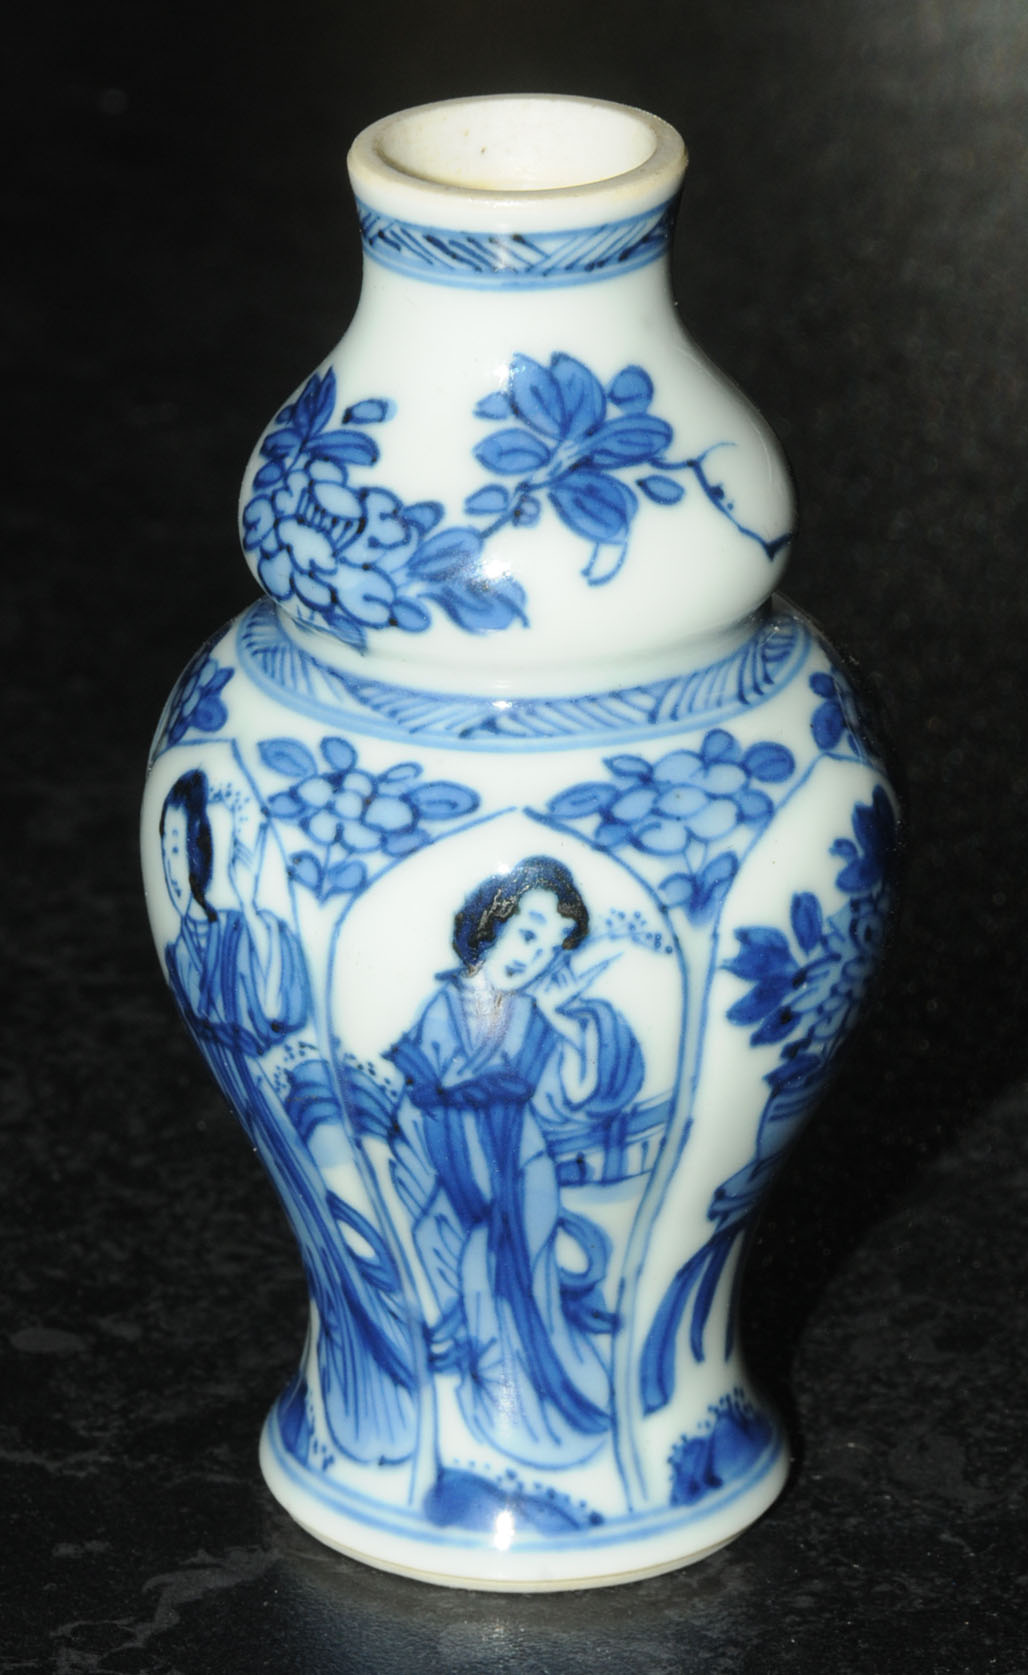 An early 20th century Chinese blue and white porcelain miniature baluster vase with lobbed sides, - Image 2 of 7